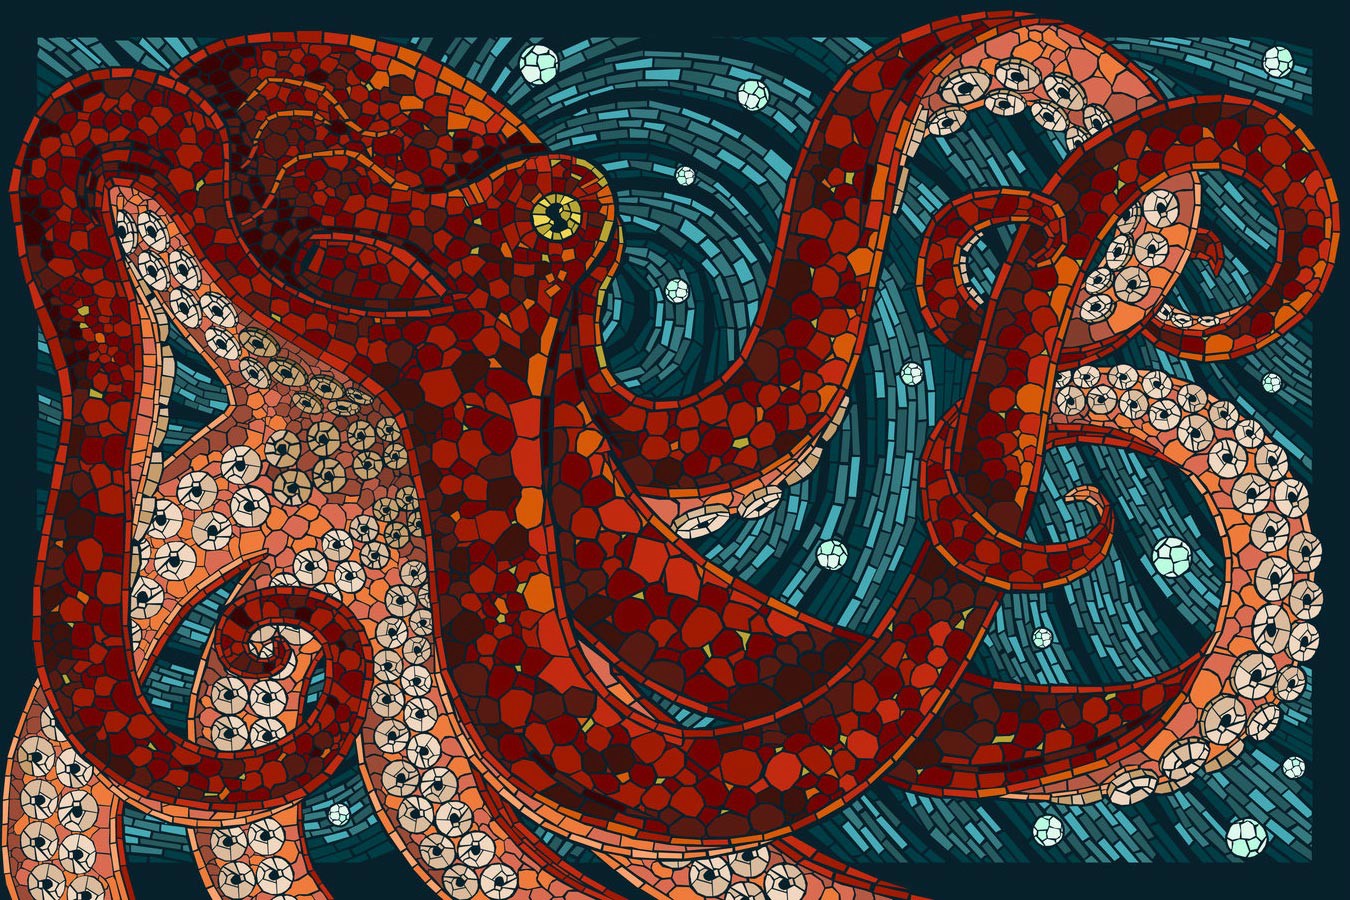 22 Octopus Hd Wallpapers - Hd Wallpapers Octopus , HD Wallpaper & Backgrounds